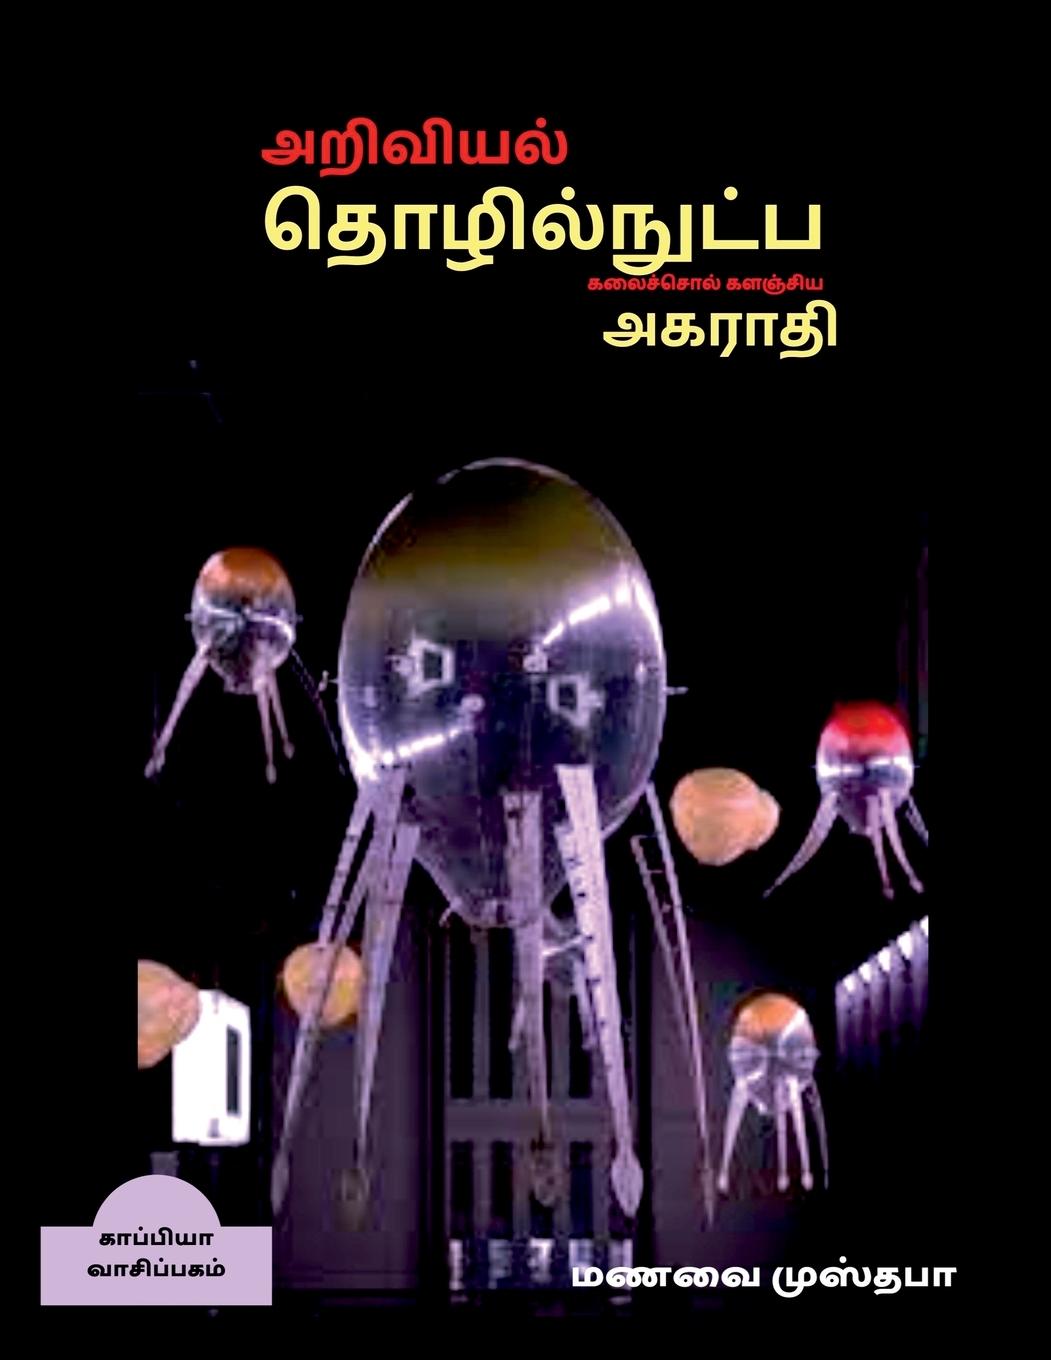 Kniha Dictionary of scientific and technical terminology (TAMIL) / &#2949;&#2993;&#3007;&#2997;&#3007;&#2991;&#2994;&#3021;, &#2980;&#3018;&#2996;&#3007;&#2 